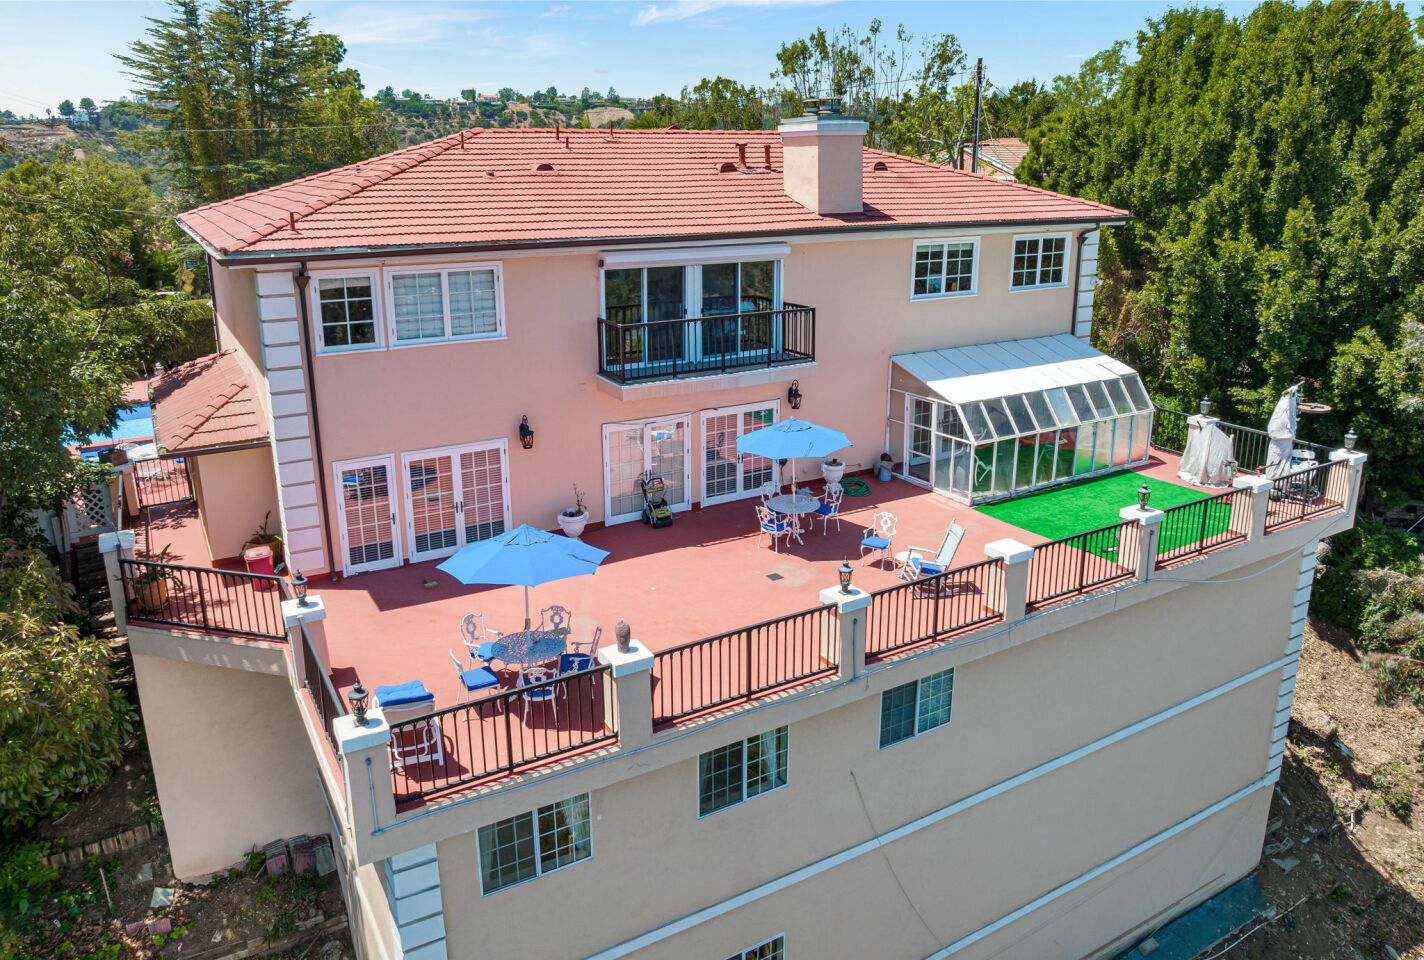 The four-story home has a deck in the back on an upper floor that is furnished.